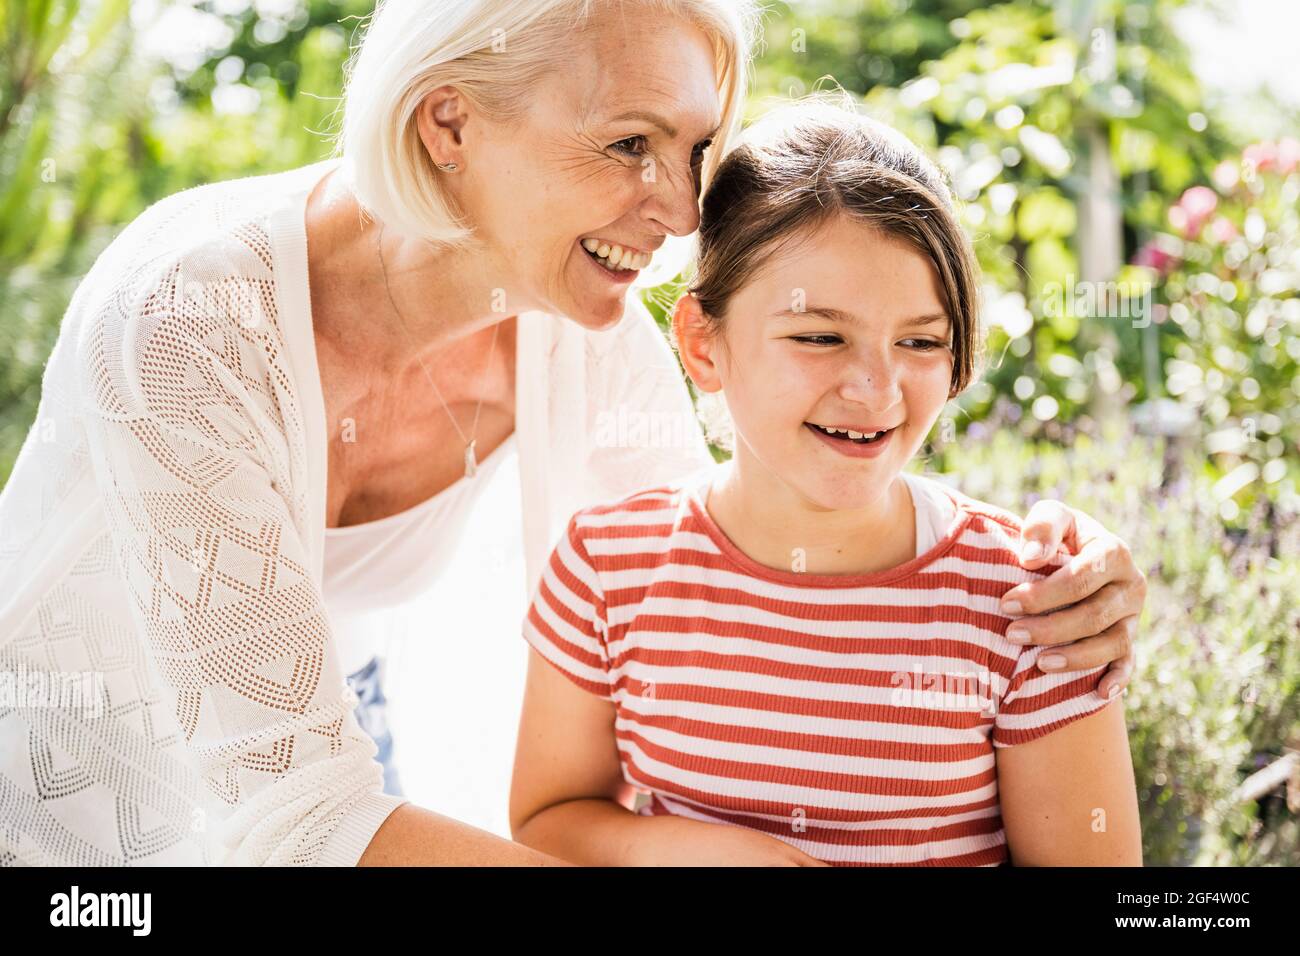 Smiling grandmother standing with arm around granddaughter Stock Photo